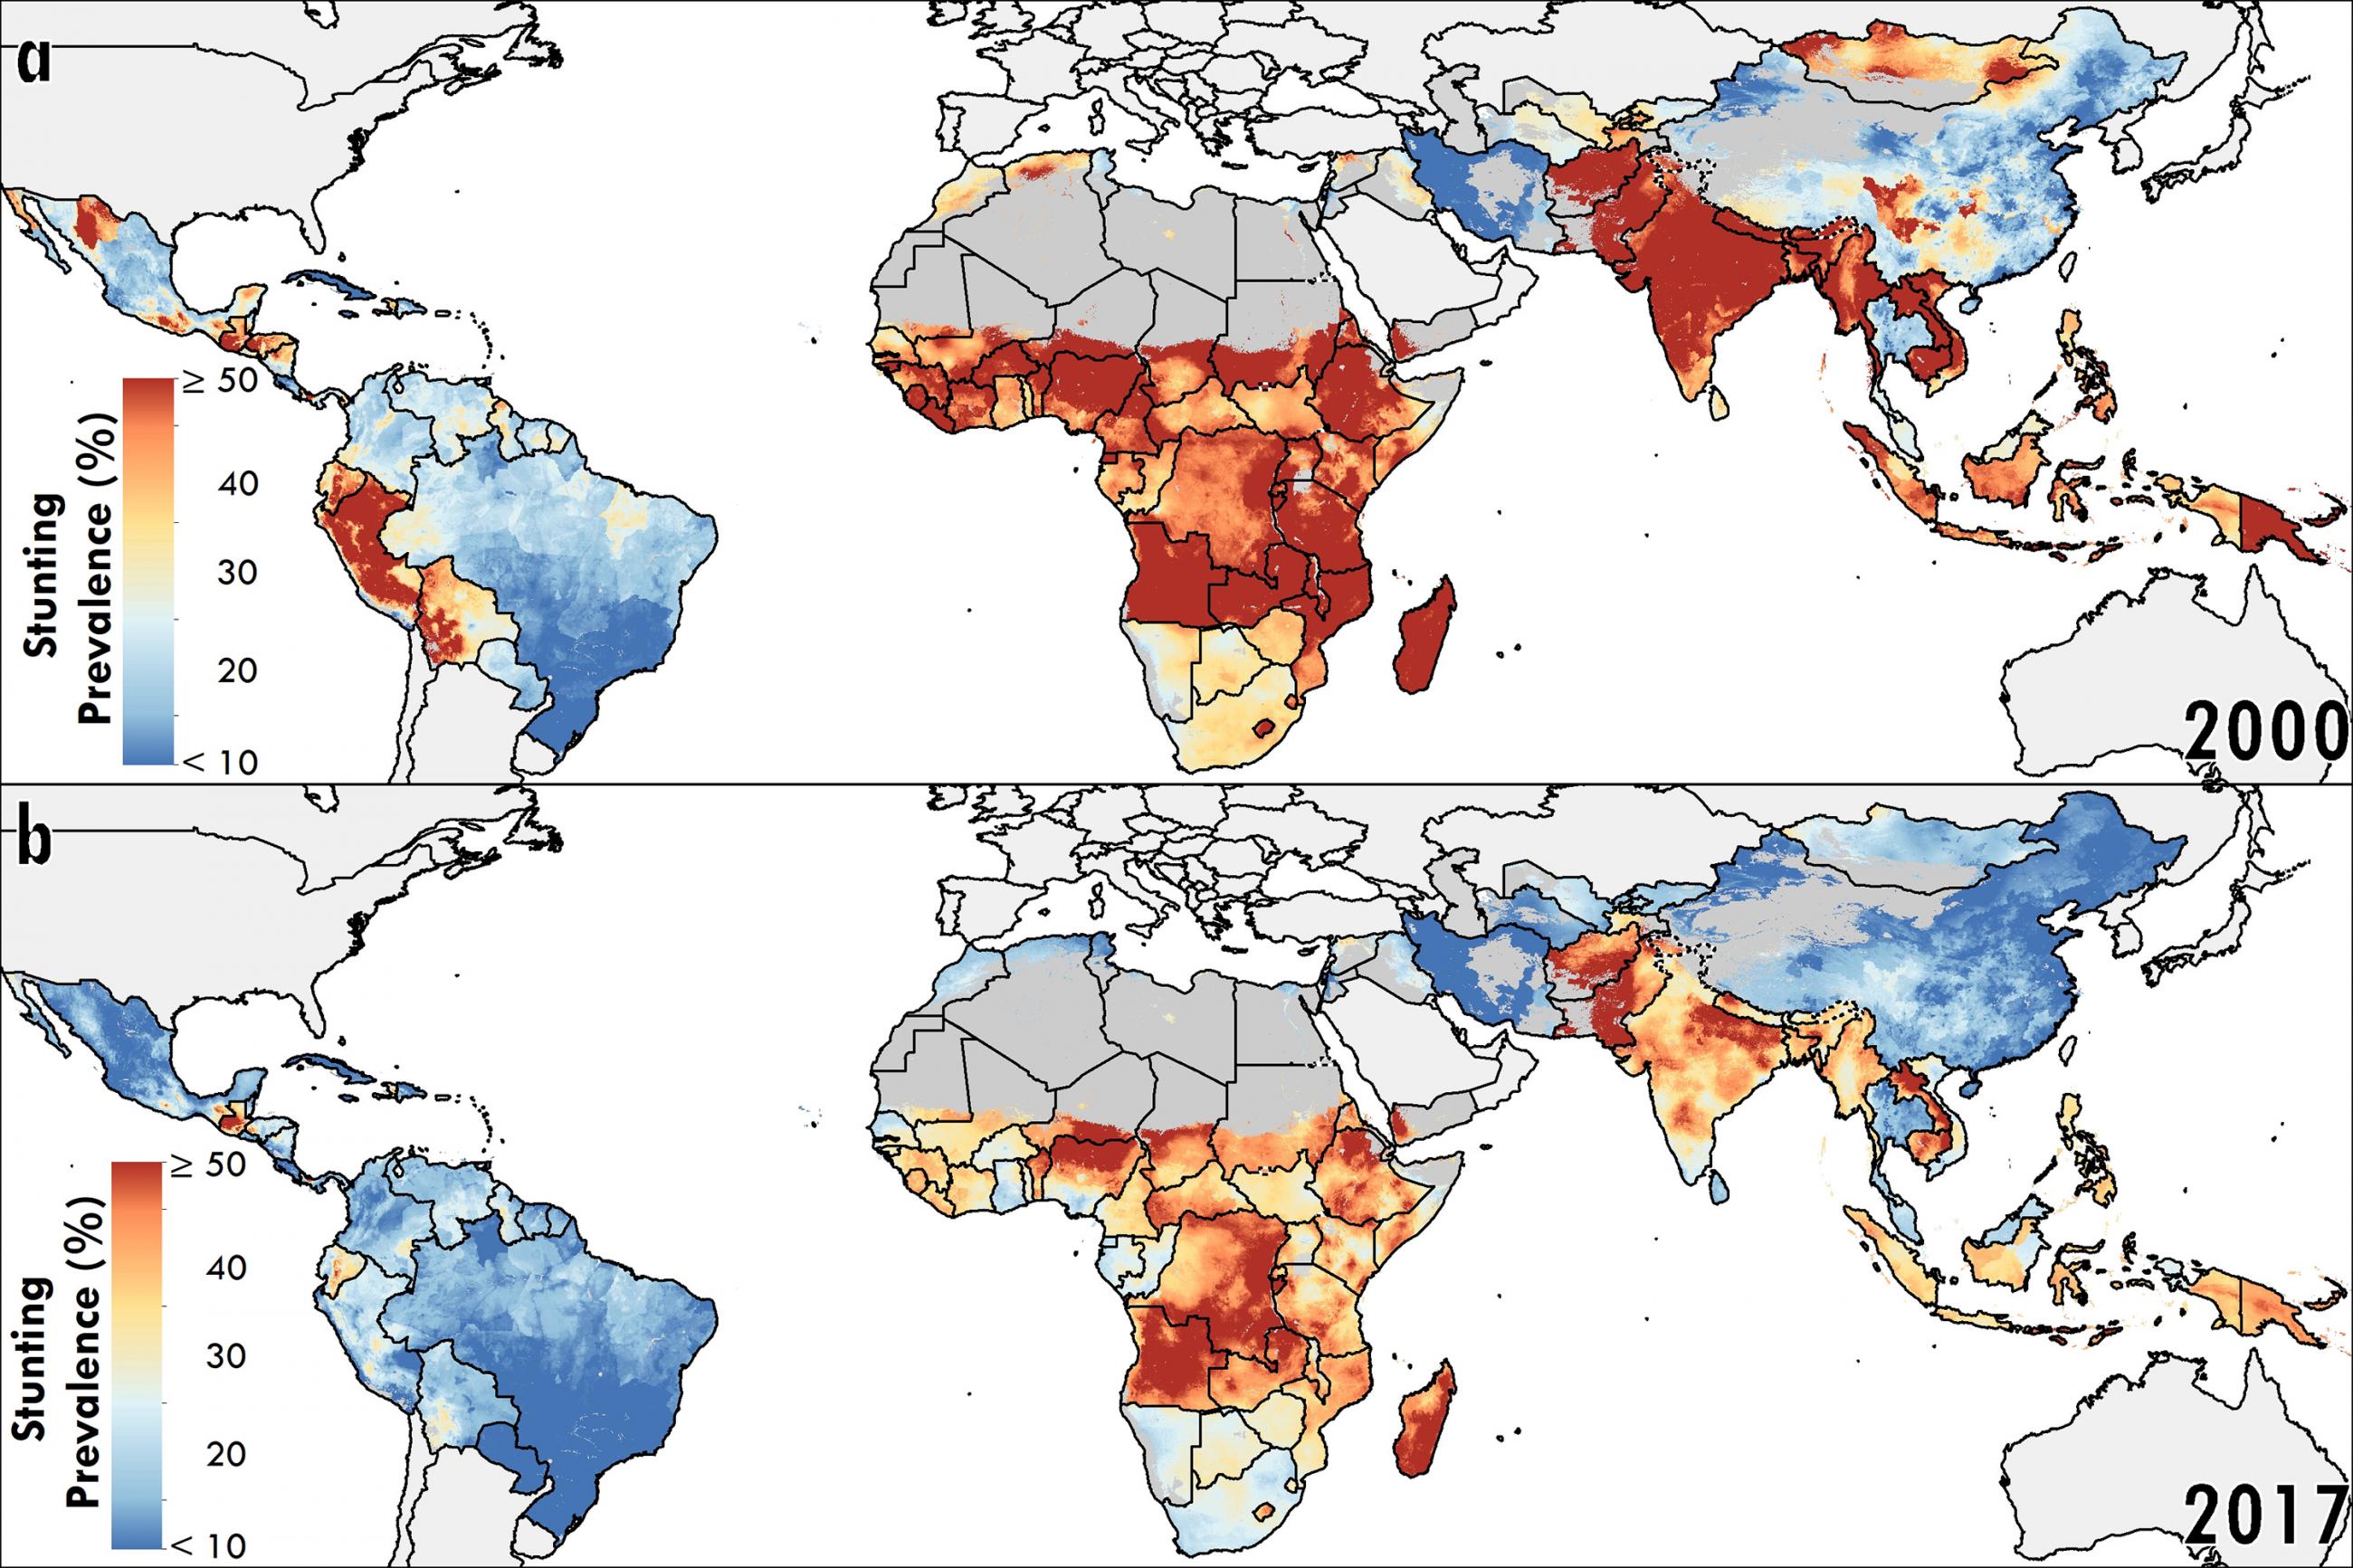 The graph shows two world maps, 200 and 2017, one on top of the other. The maps are colored according to the prevalence of stunting, which goes down in the seventeen years from the first to the second map. 